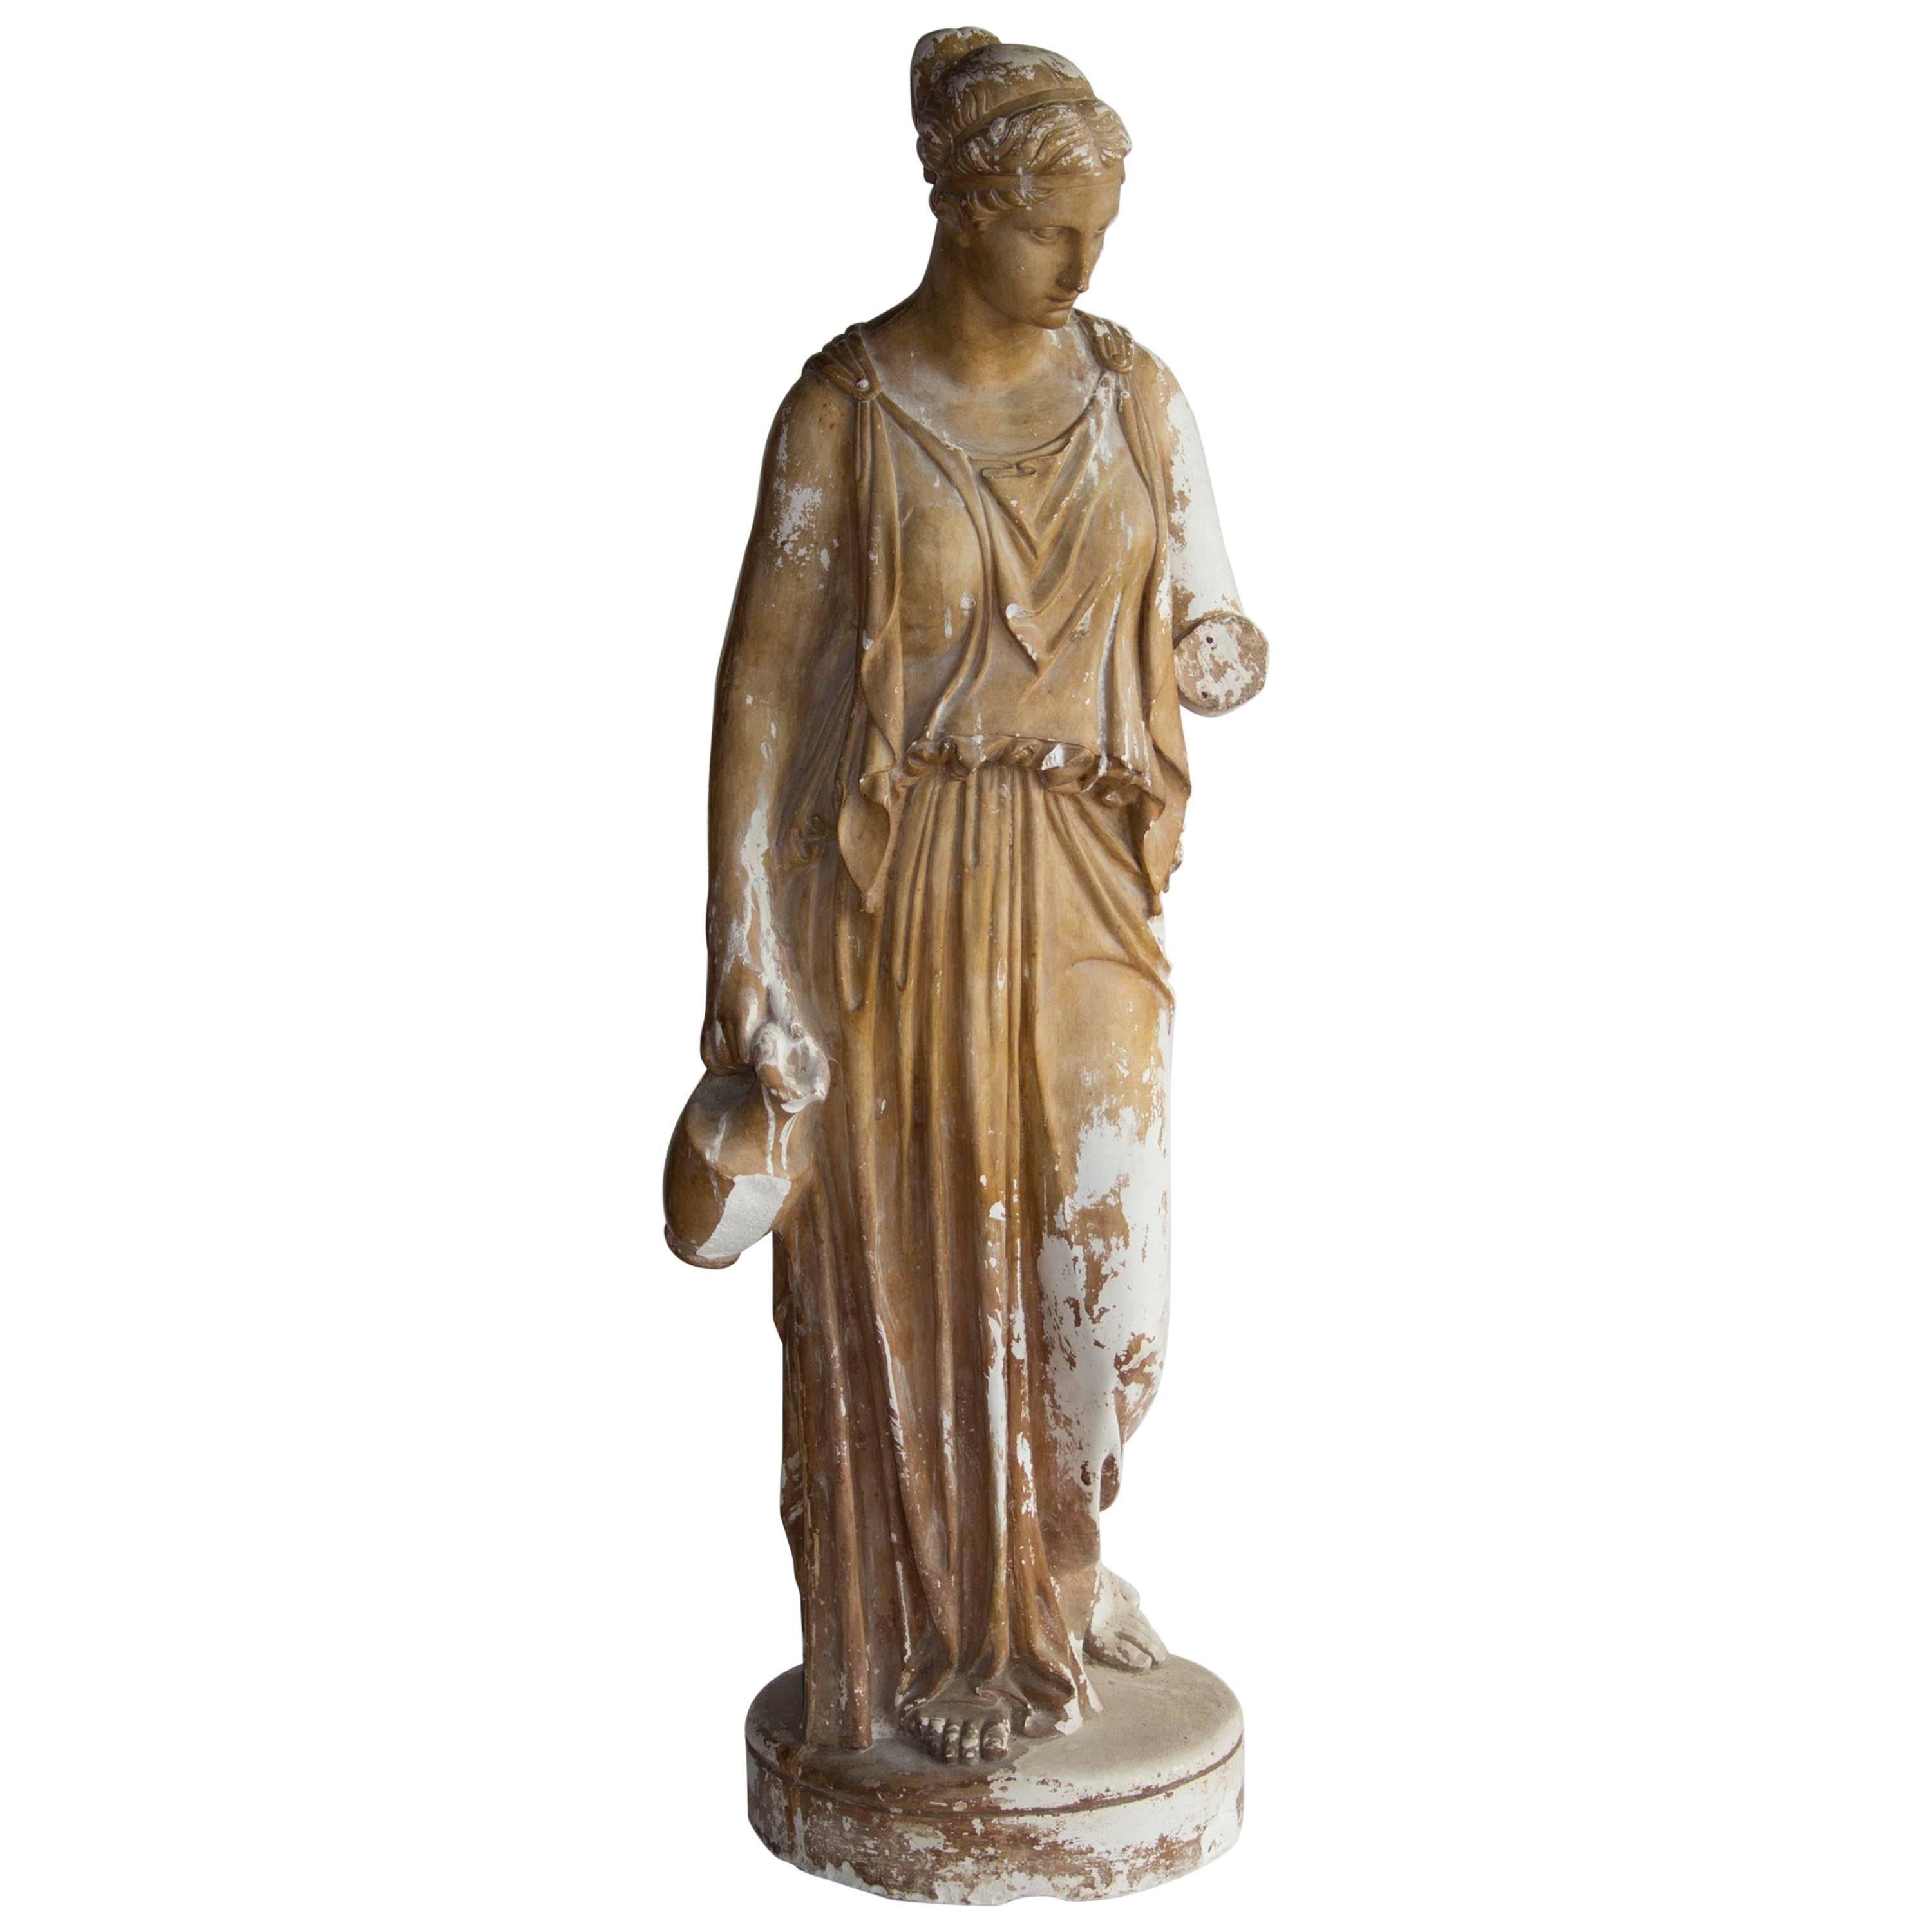 Antique Study in Plaster, Statue of Hebe